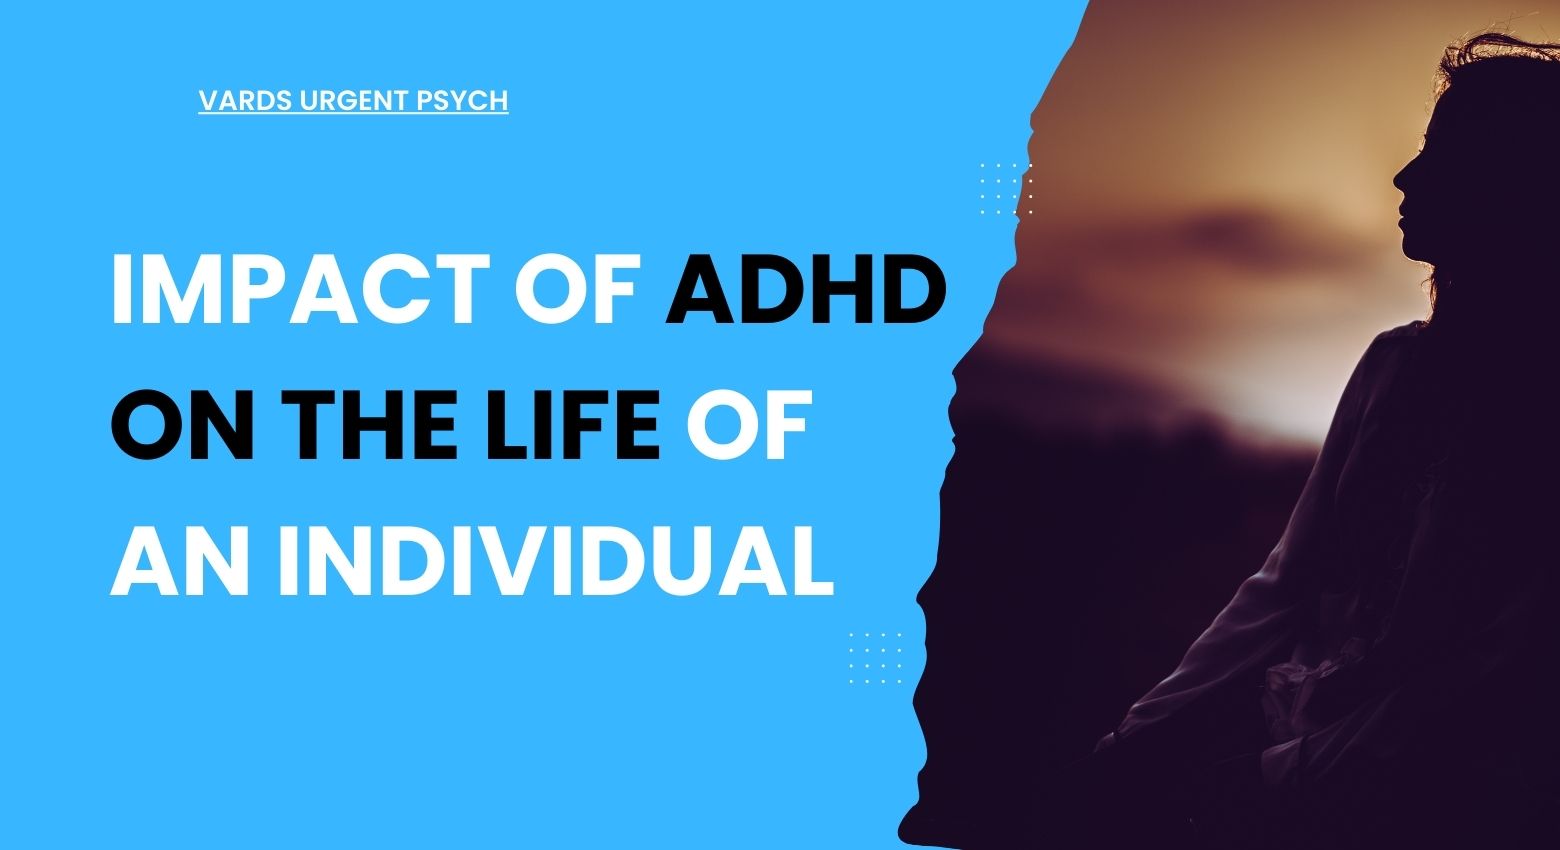 Impact of ADHD on the life of an individual - Vards